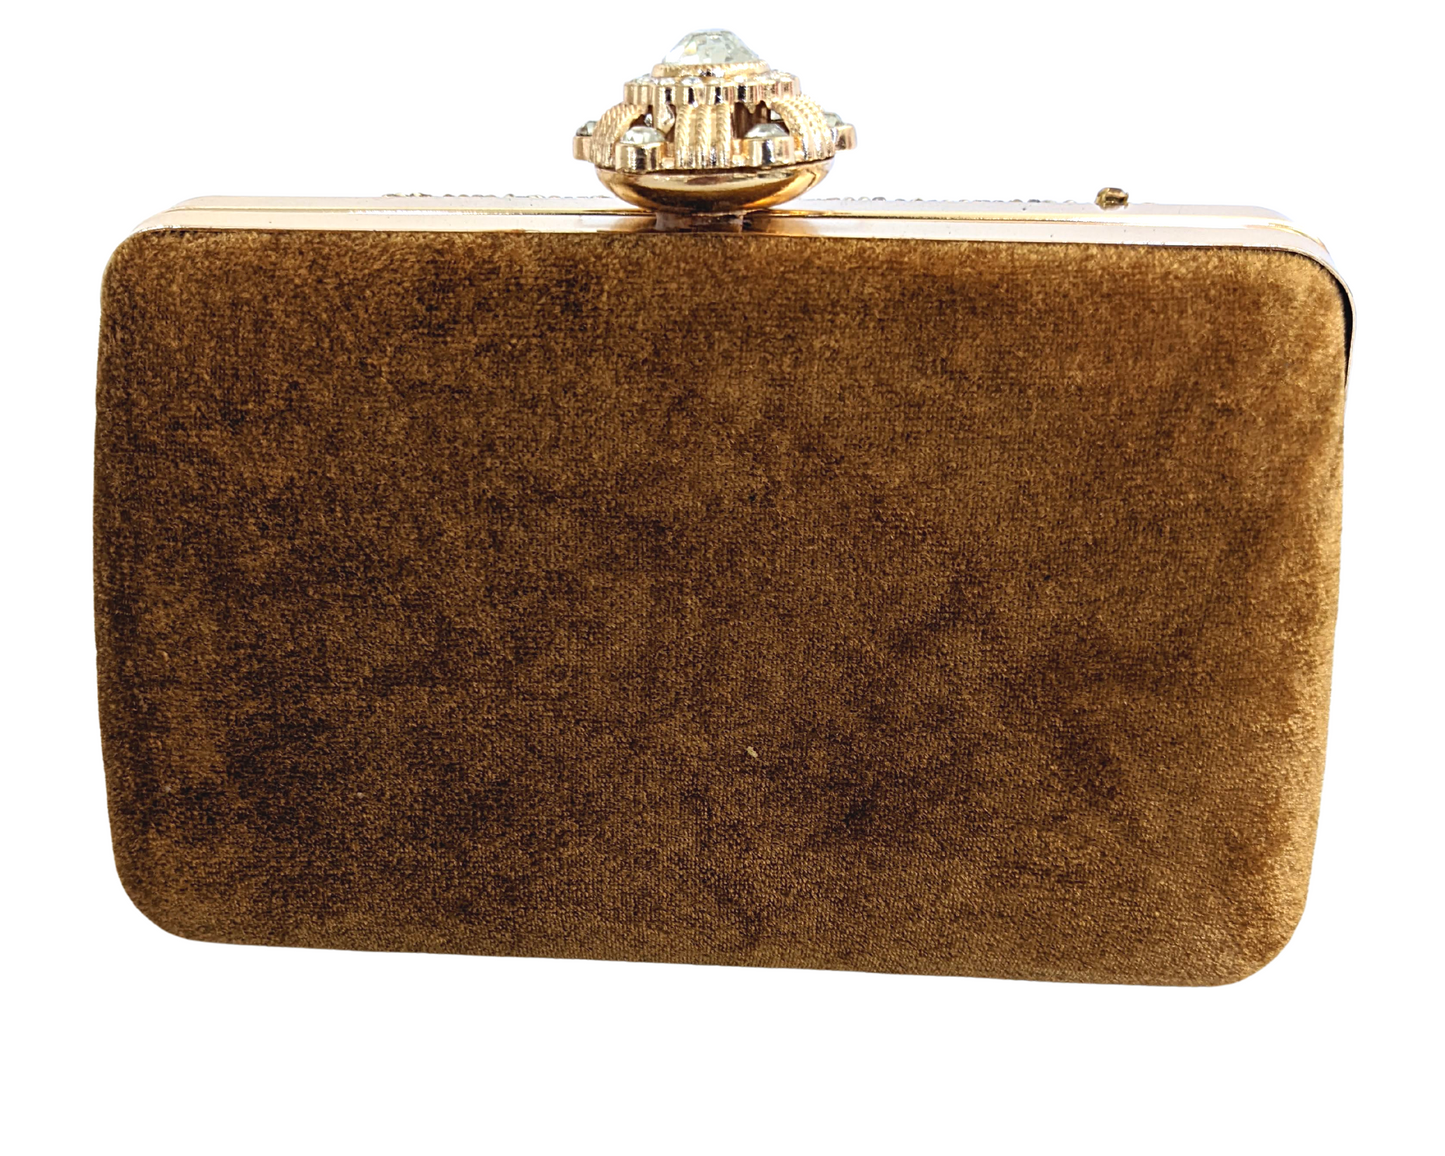 Sand Gold Luxury Bags, Clutch Purse For Women